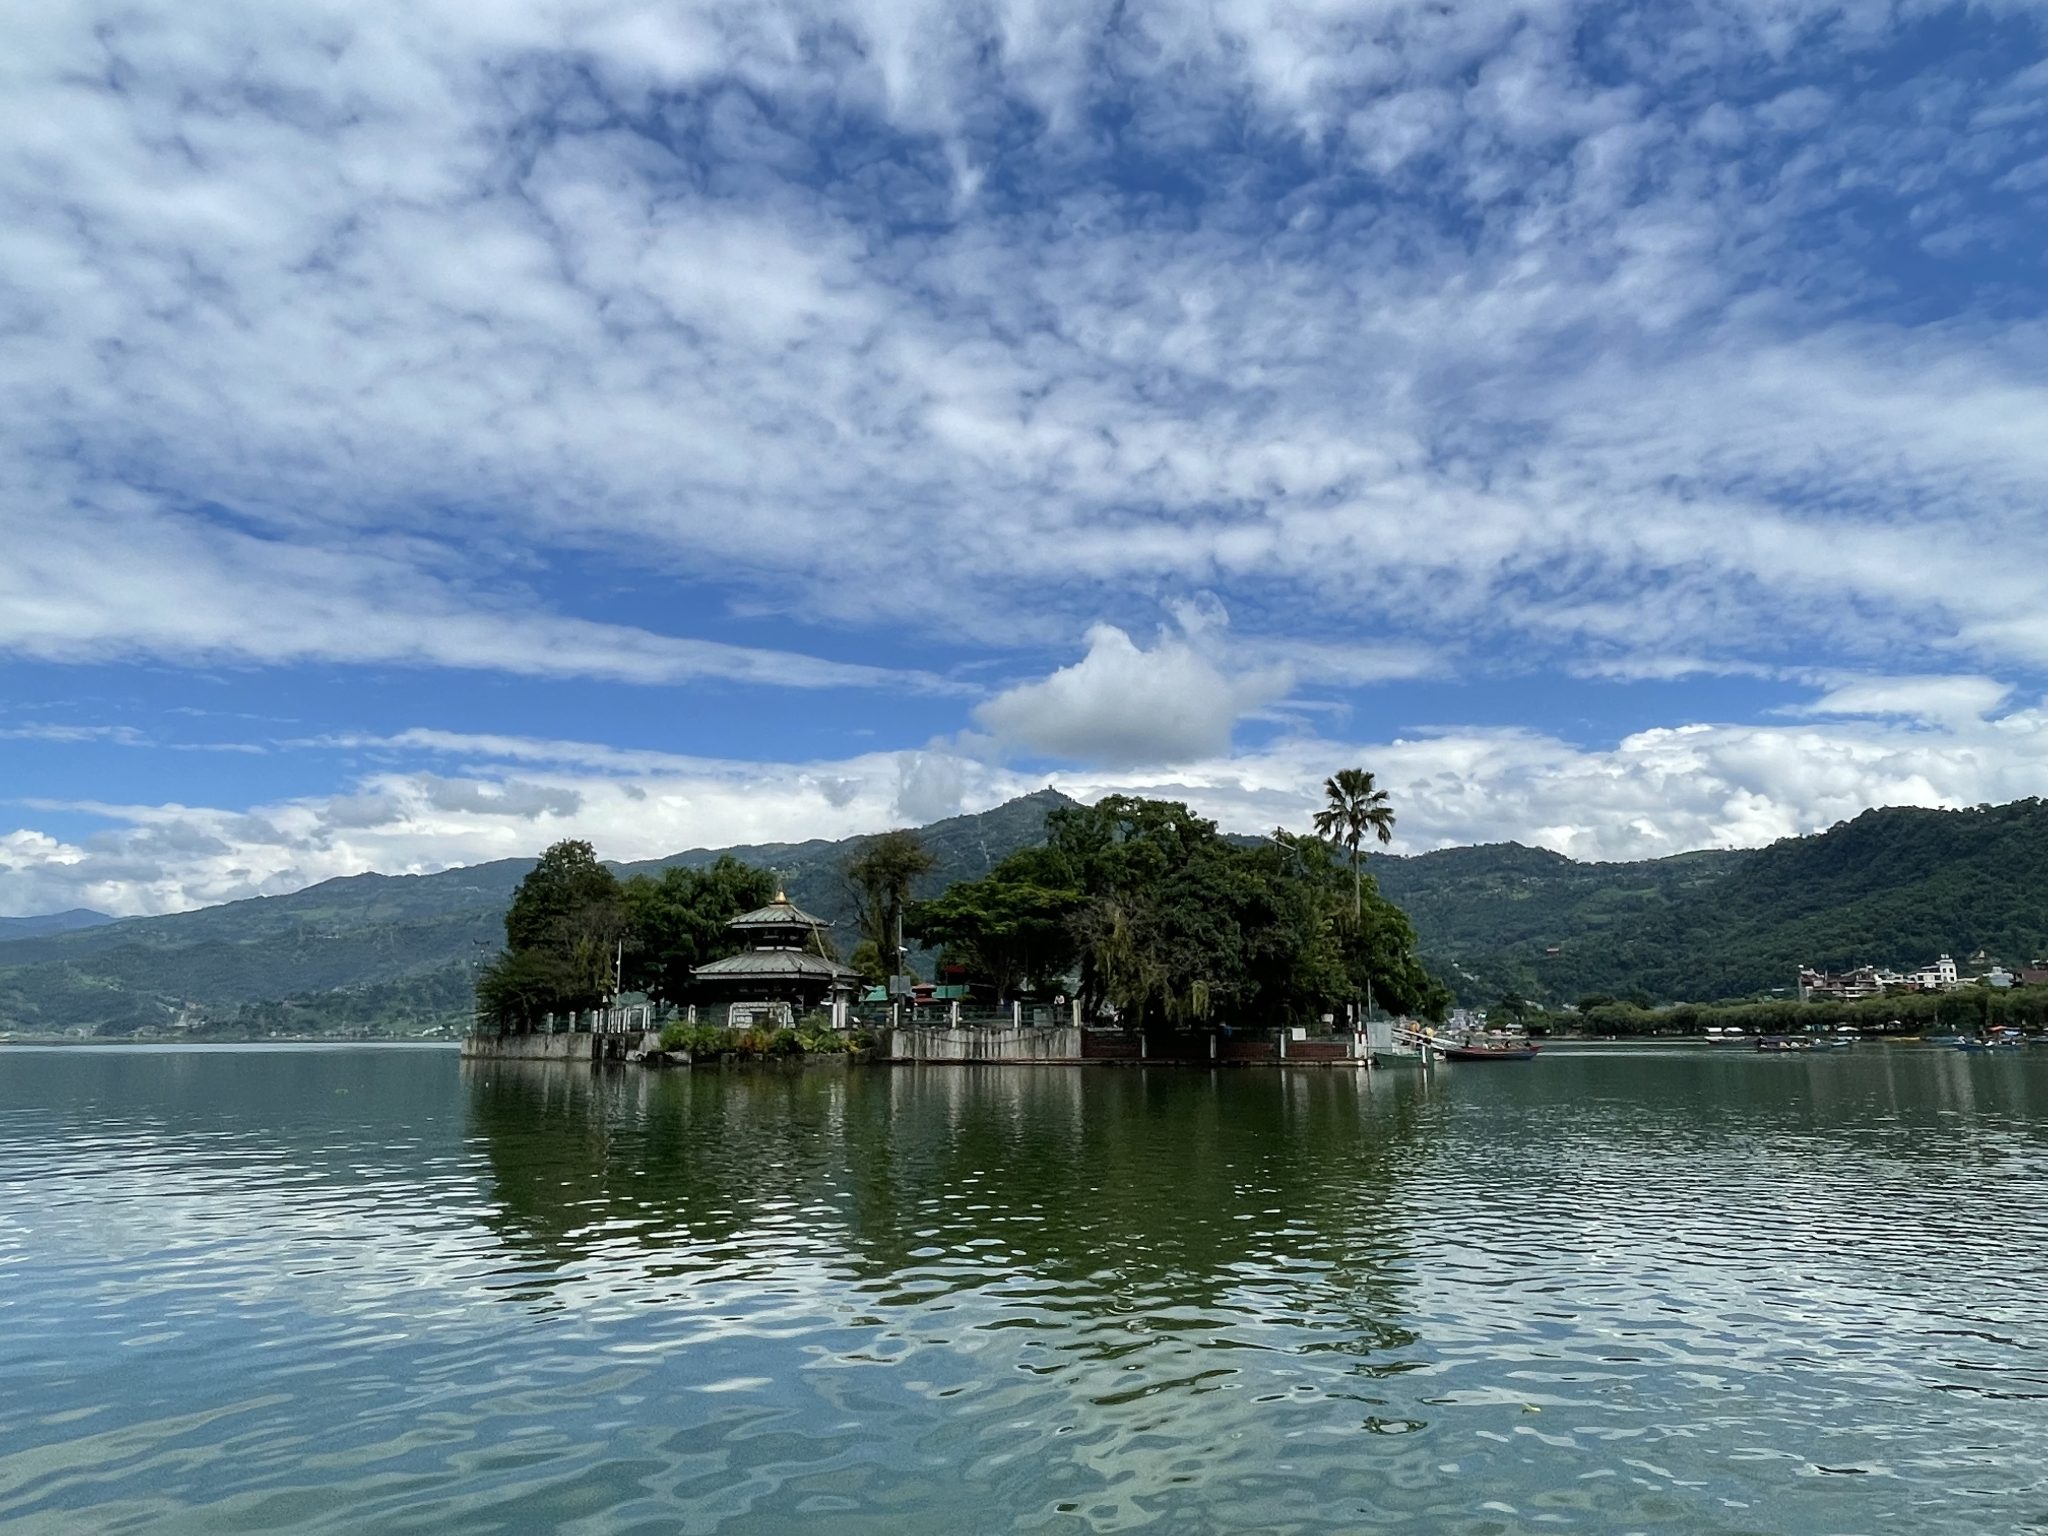 Tal Barahi Temple, Pokhara, Nepal. This temple is built on a tiny island in the middle of Phewa Lake.